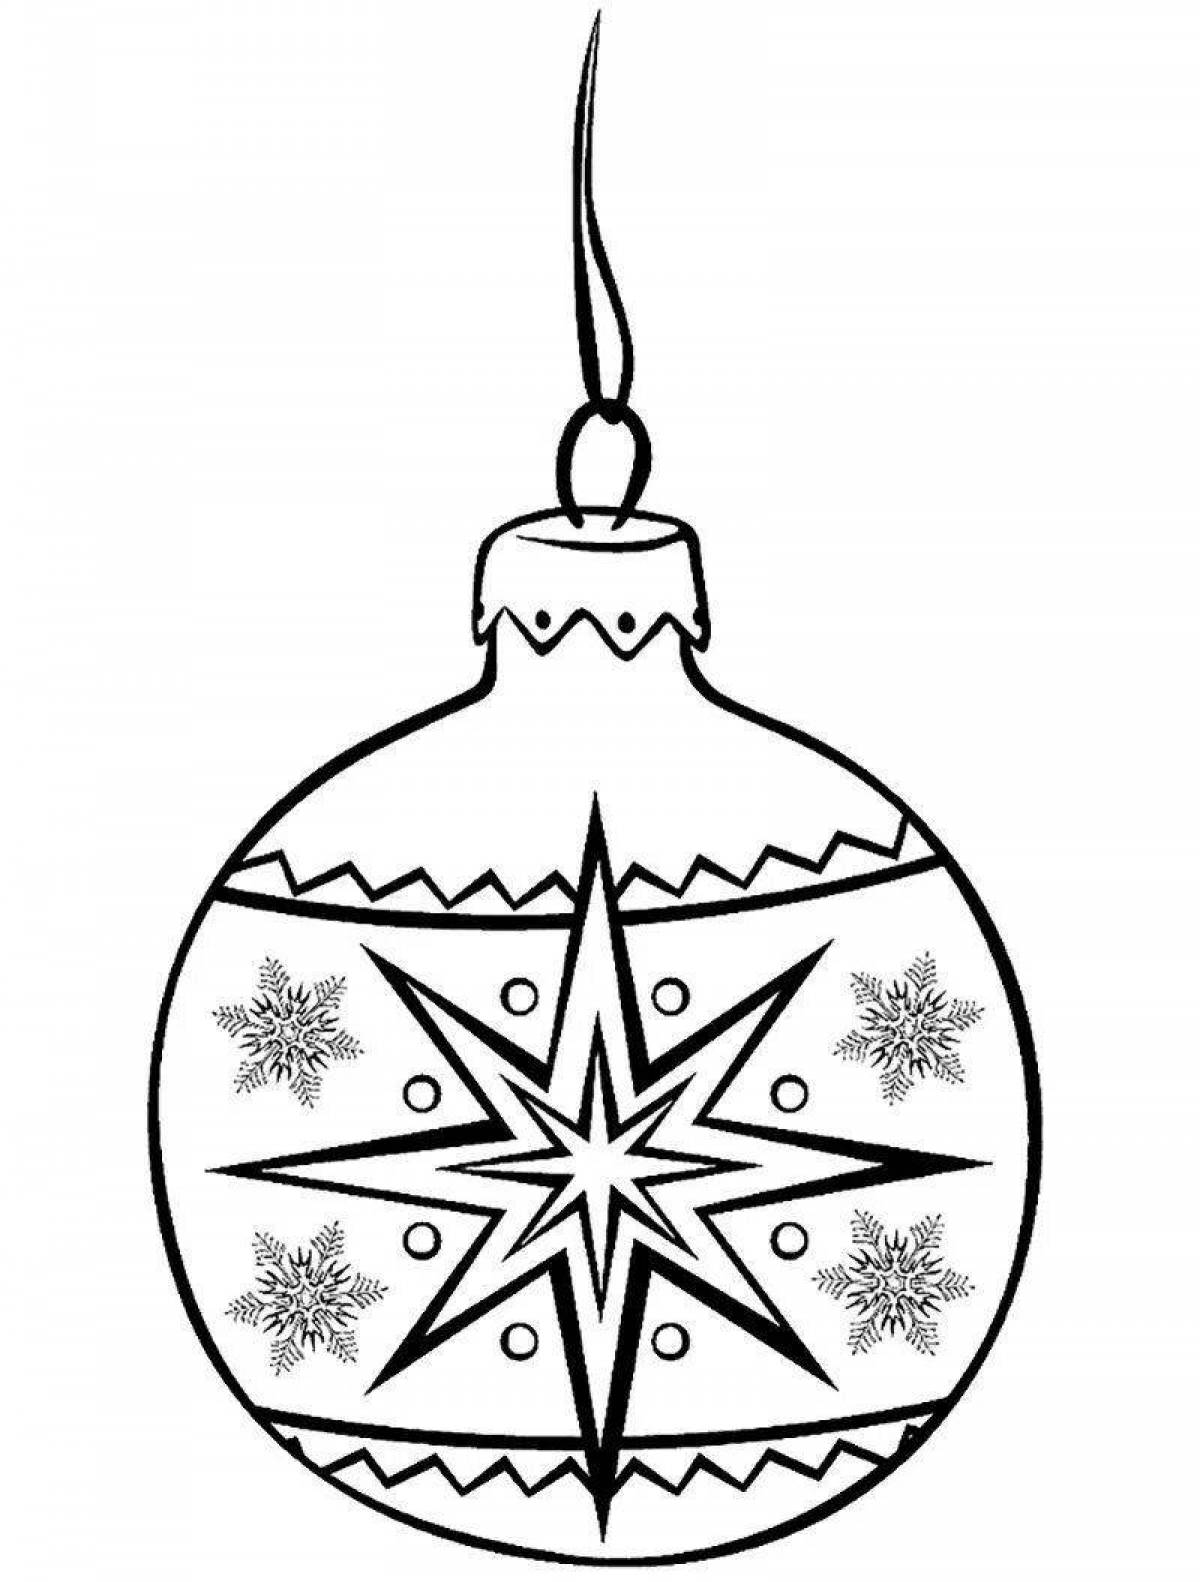 Sparkling Christmas toy ball coloring page